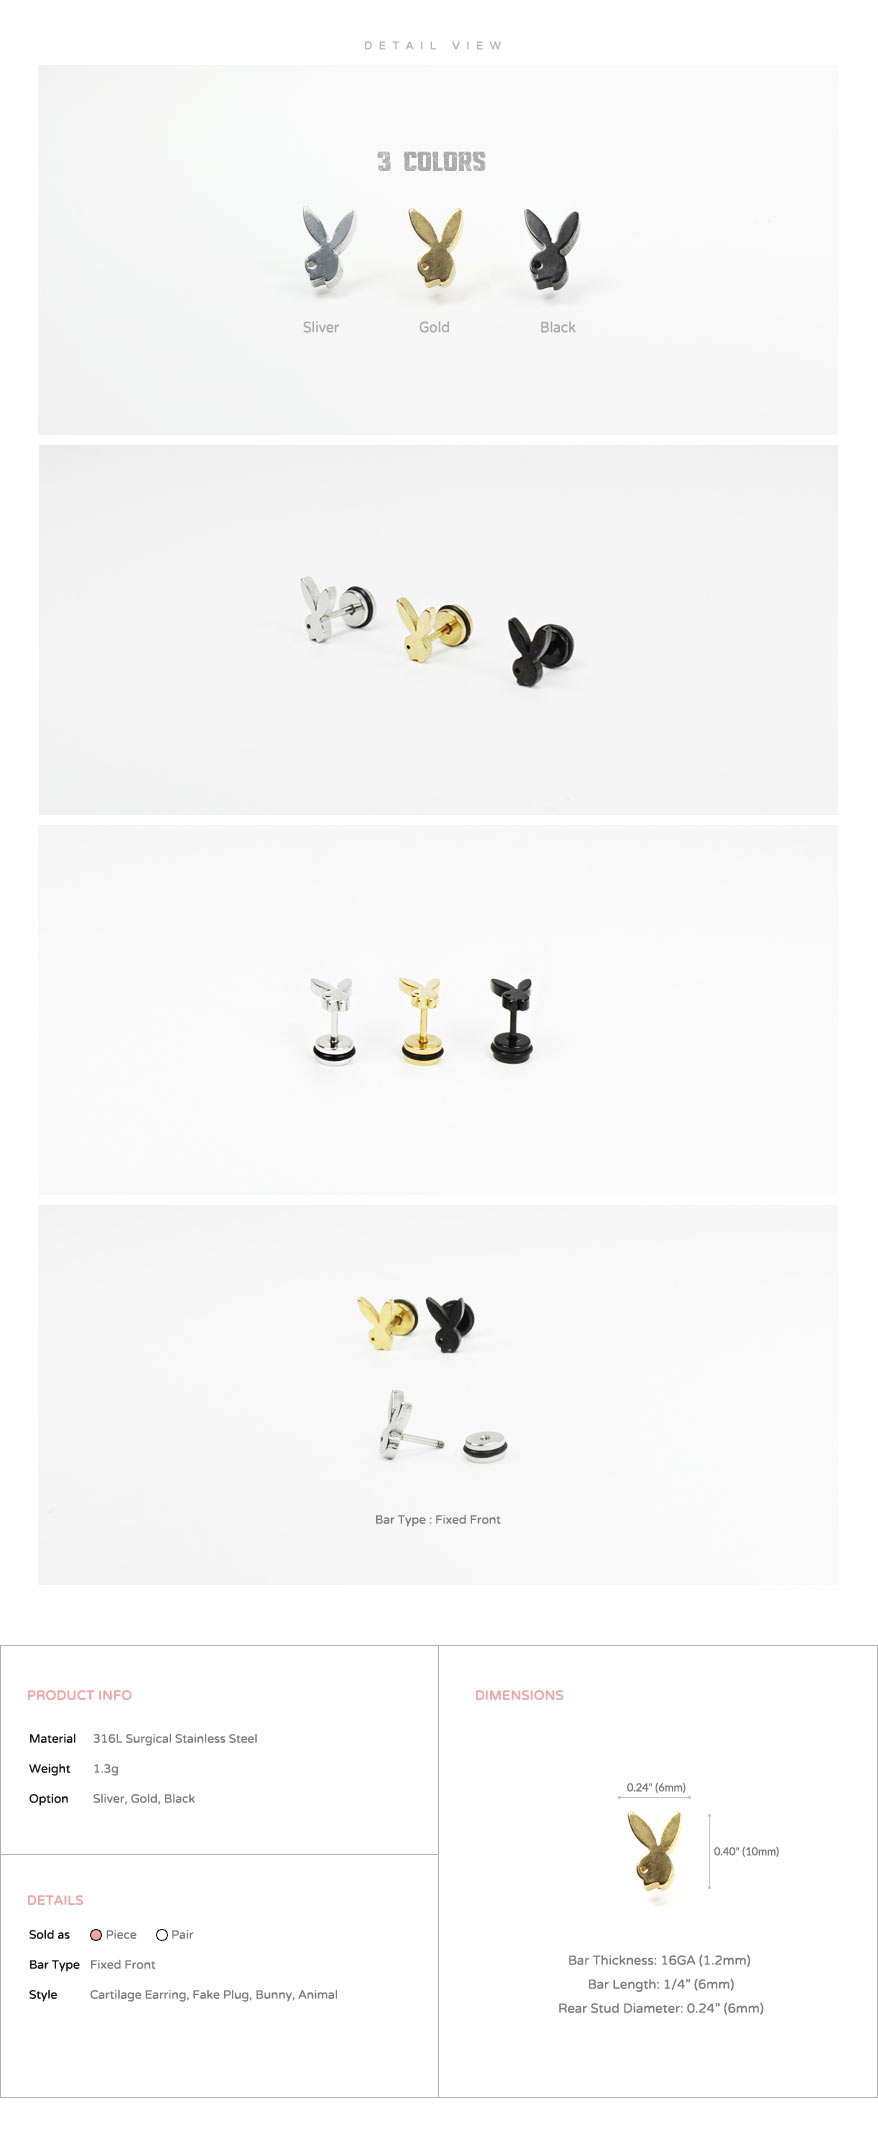 accessories_Korean-style_asian-style_piercing_316l_ear_cartilage_piercing_earrings_16g_ear-studs_cheater_fake_plug_bunny_character_playboy_5